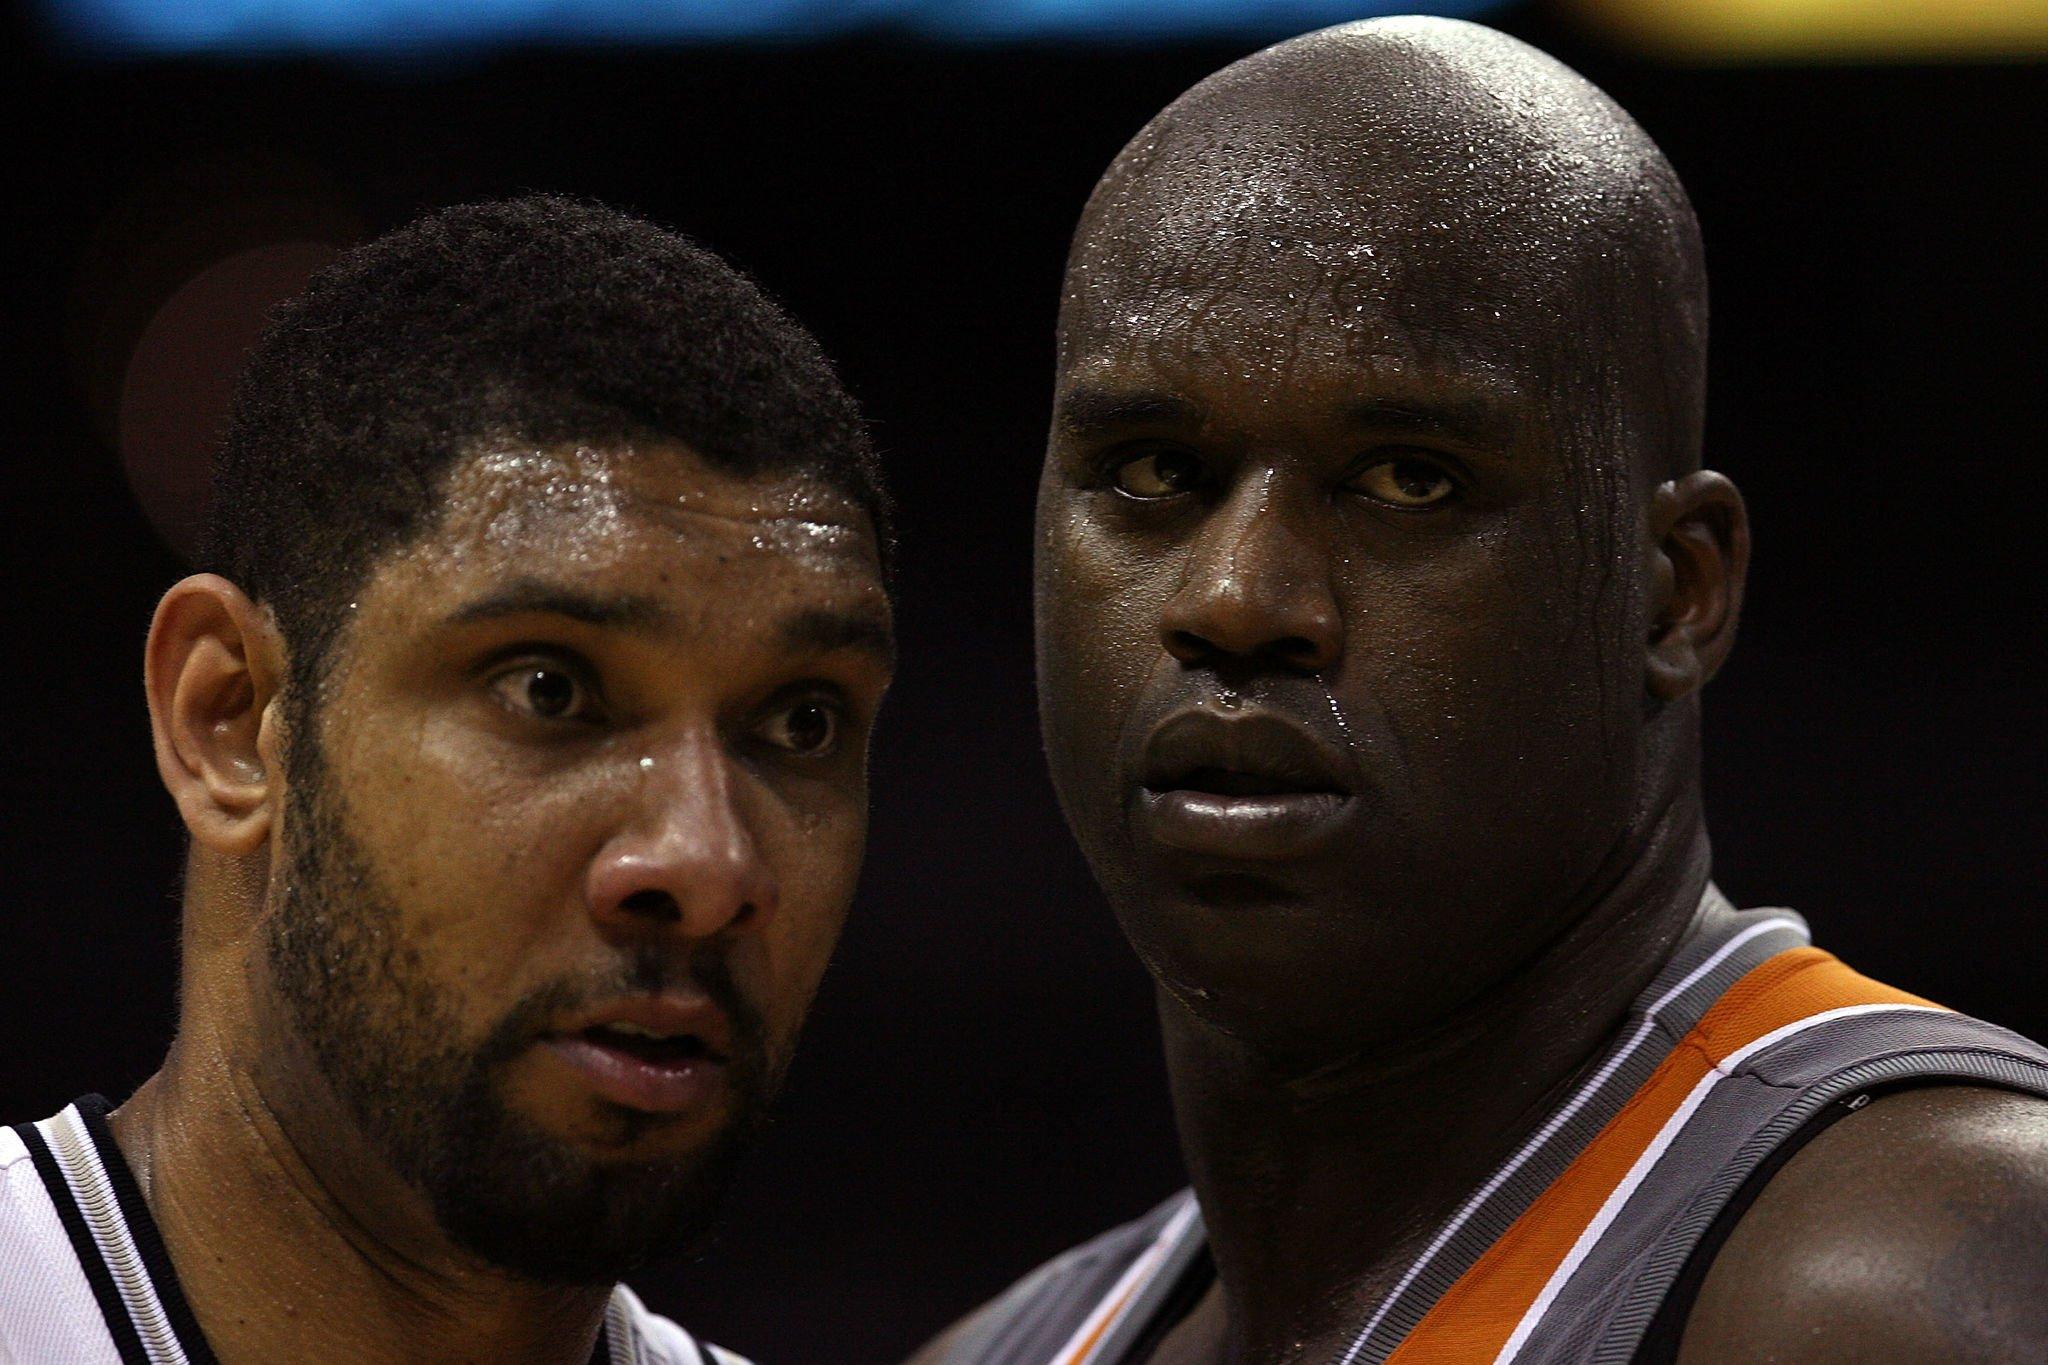 SAN ANTONIO - APRIL 19: Forward Tim Duncan #21 of the San Antonio Spurs and Shaquille O'Neal #32 of the Phoenix Suns in Game One of the Western Conference Quarterfinals during the 2008 NBA Playoffs at the AT&T Center on April 19, 2008 in San Antonio, Texas. NOTE TO USER: User expressly acknowledges and agrees that, by downloading and or using this photograph, User is consenting to the terms and conditions of the Getty Images License Agreement. (Photo by Ronald Martinez/Getty Images)